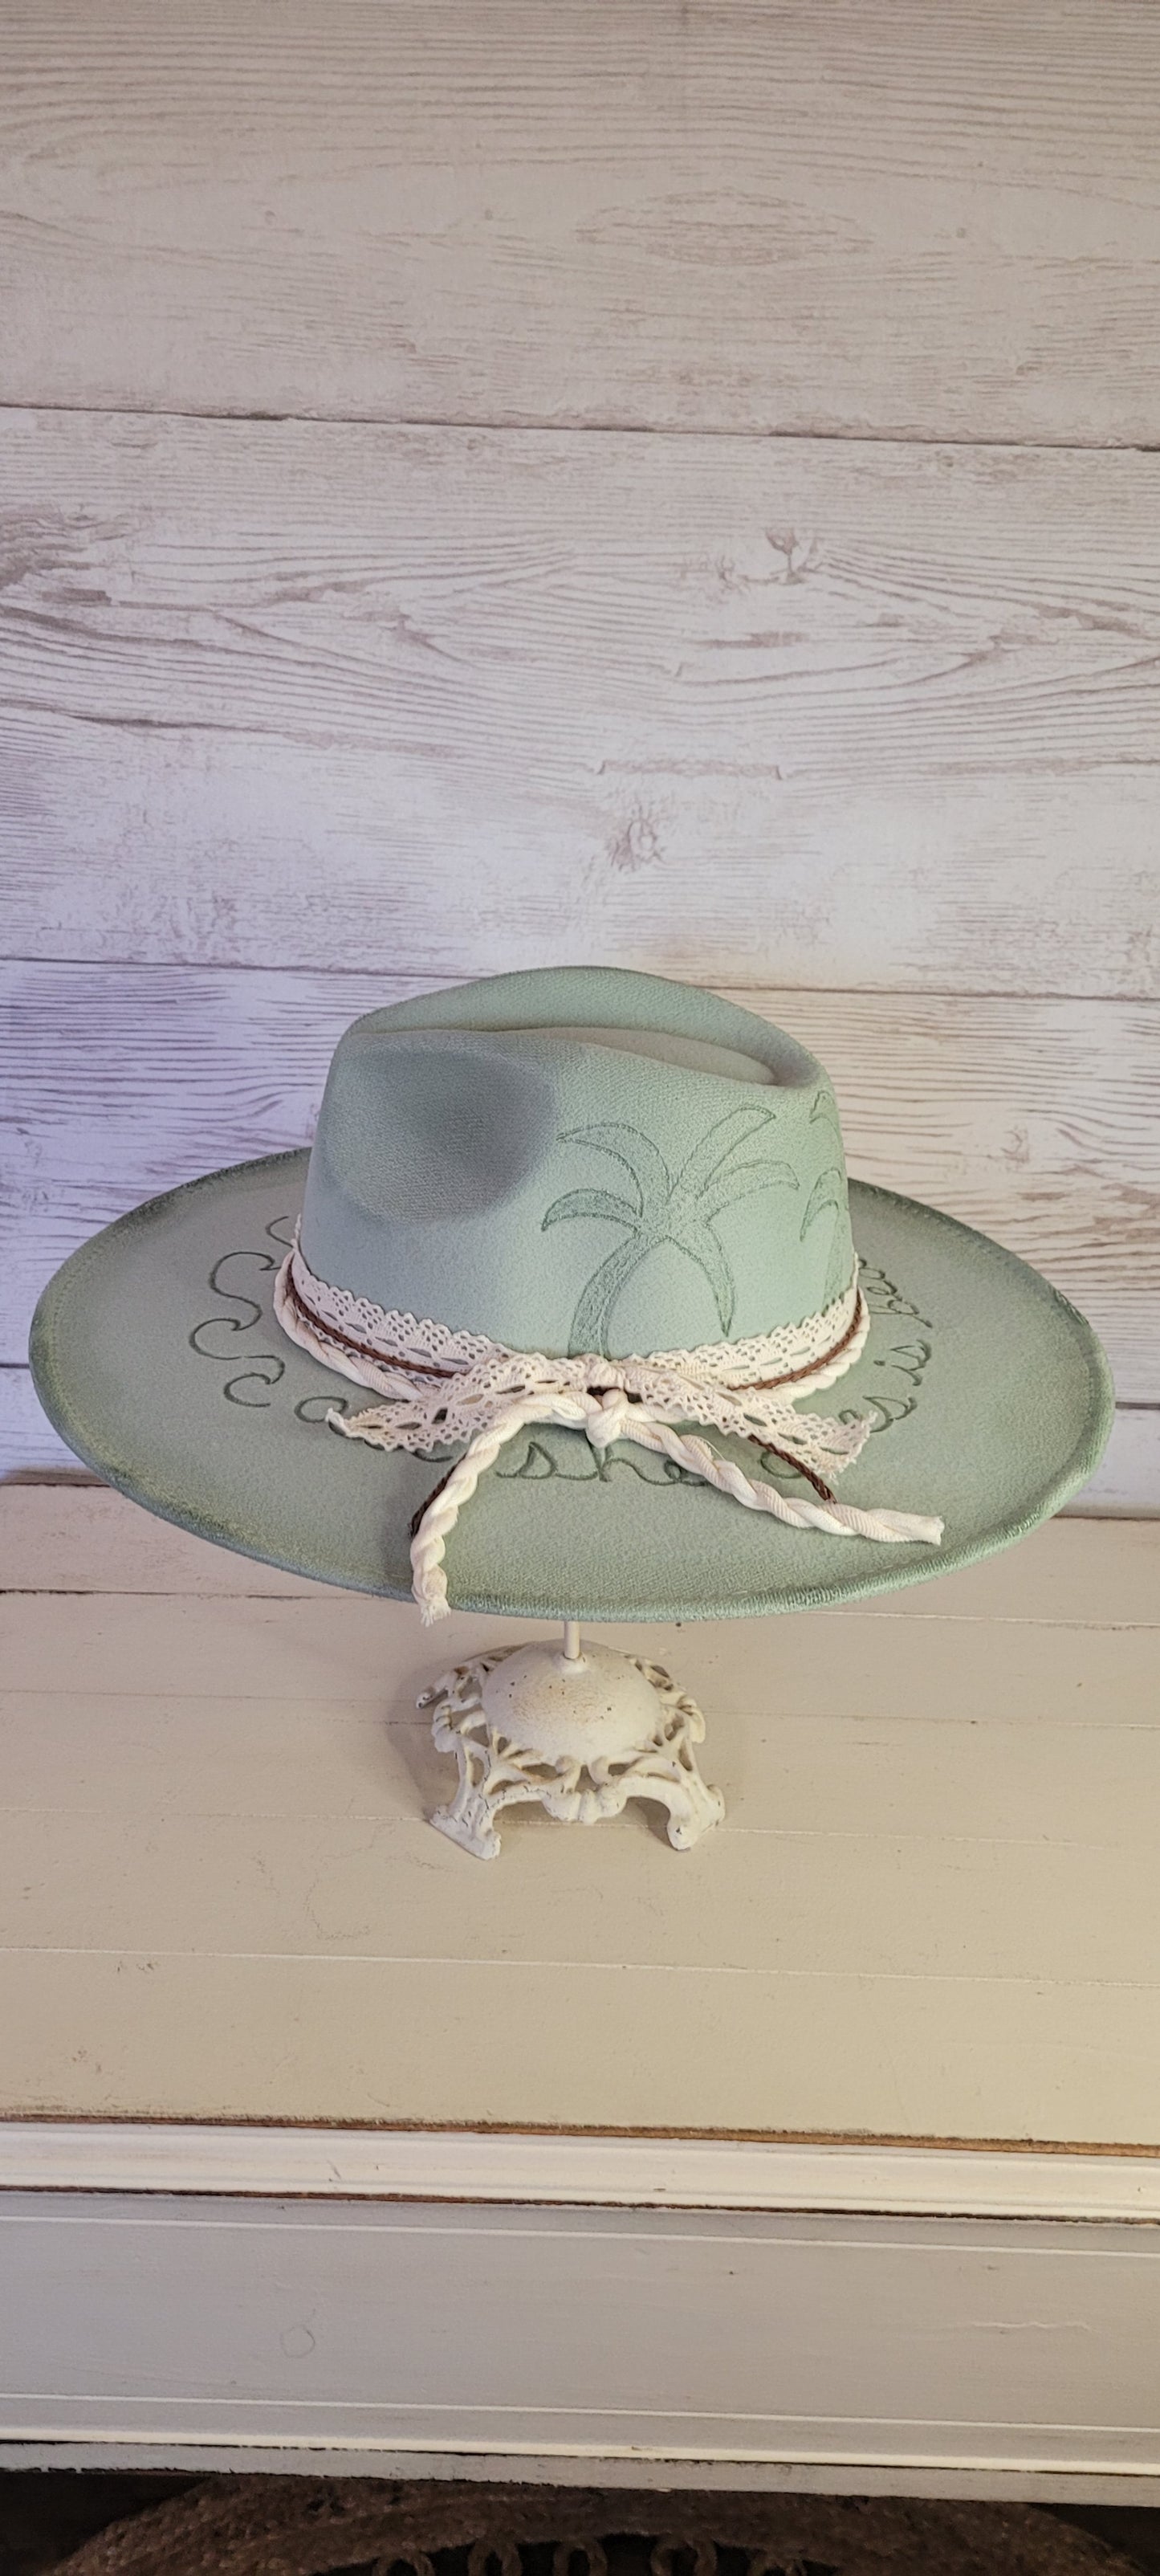 Features sunshine, palm trees, waves & "all she does is beach, beach, beach" engraved Lace ribbon, brown cord, & natural gauze rope Felt hat Flat brim 65% polyester and 35% cotton Ribbon drawstring for hat size adjustment Head Circumference: 24" Crown Height: 5" Brim Length: 15.75" Brim Width: 14.5" Branded & numbered inside crown Custom burned & engraved by Kayla